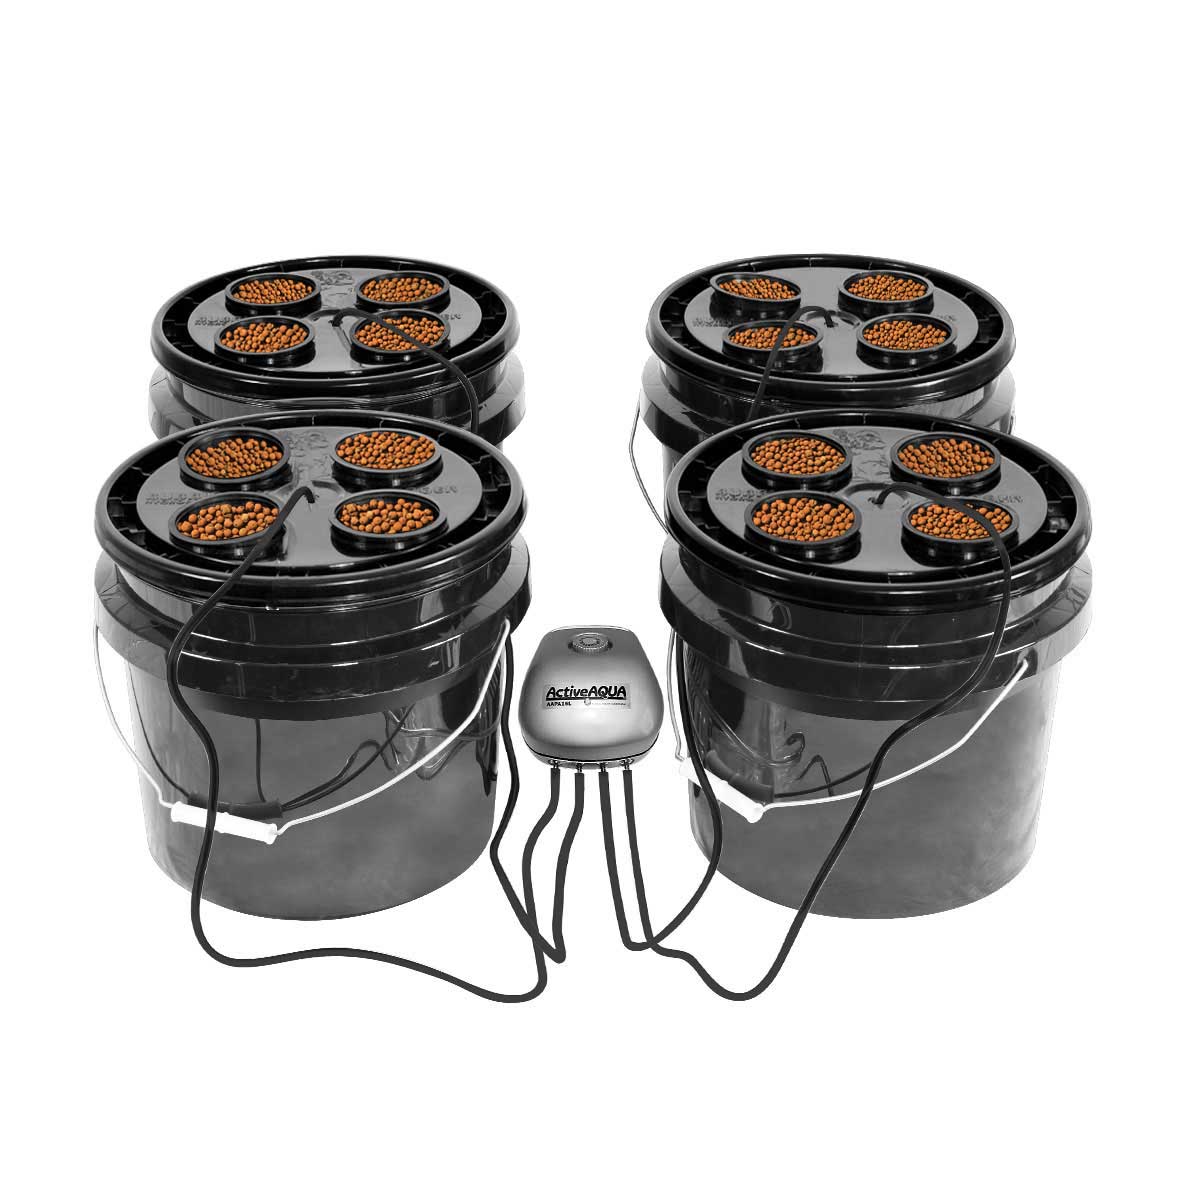 Bubble Brothers 4x4 16 Site DWC Bucket System